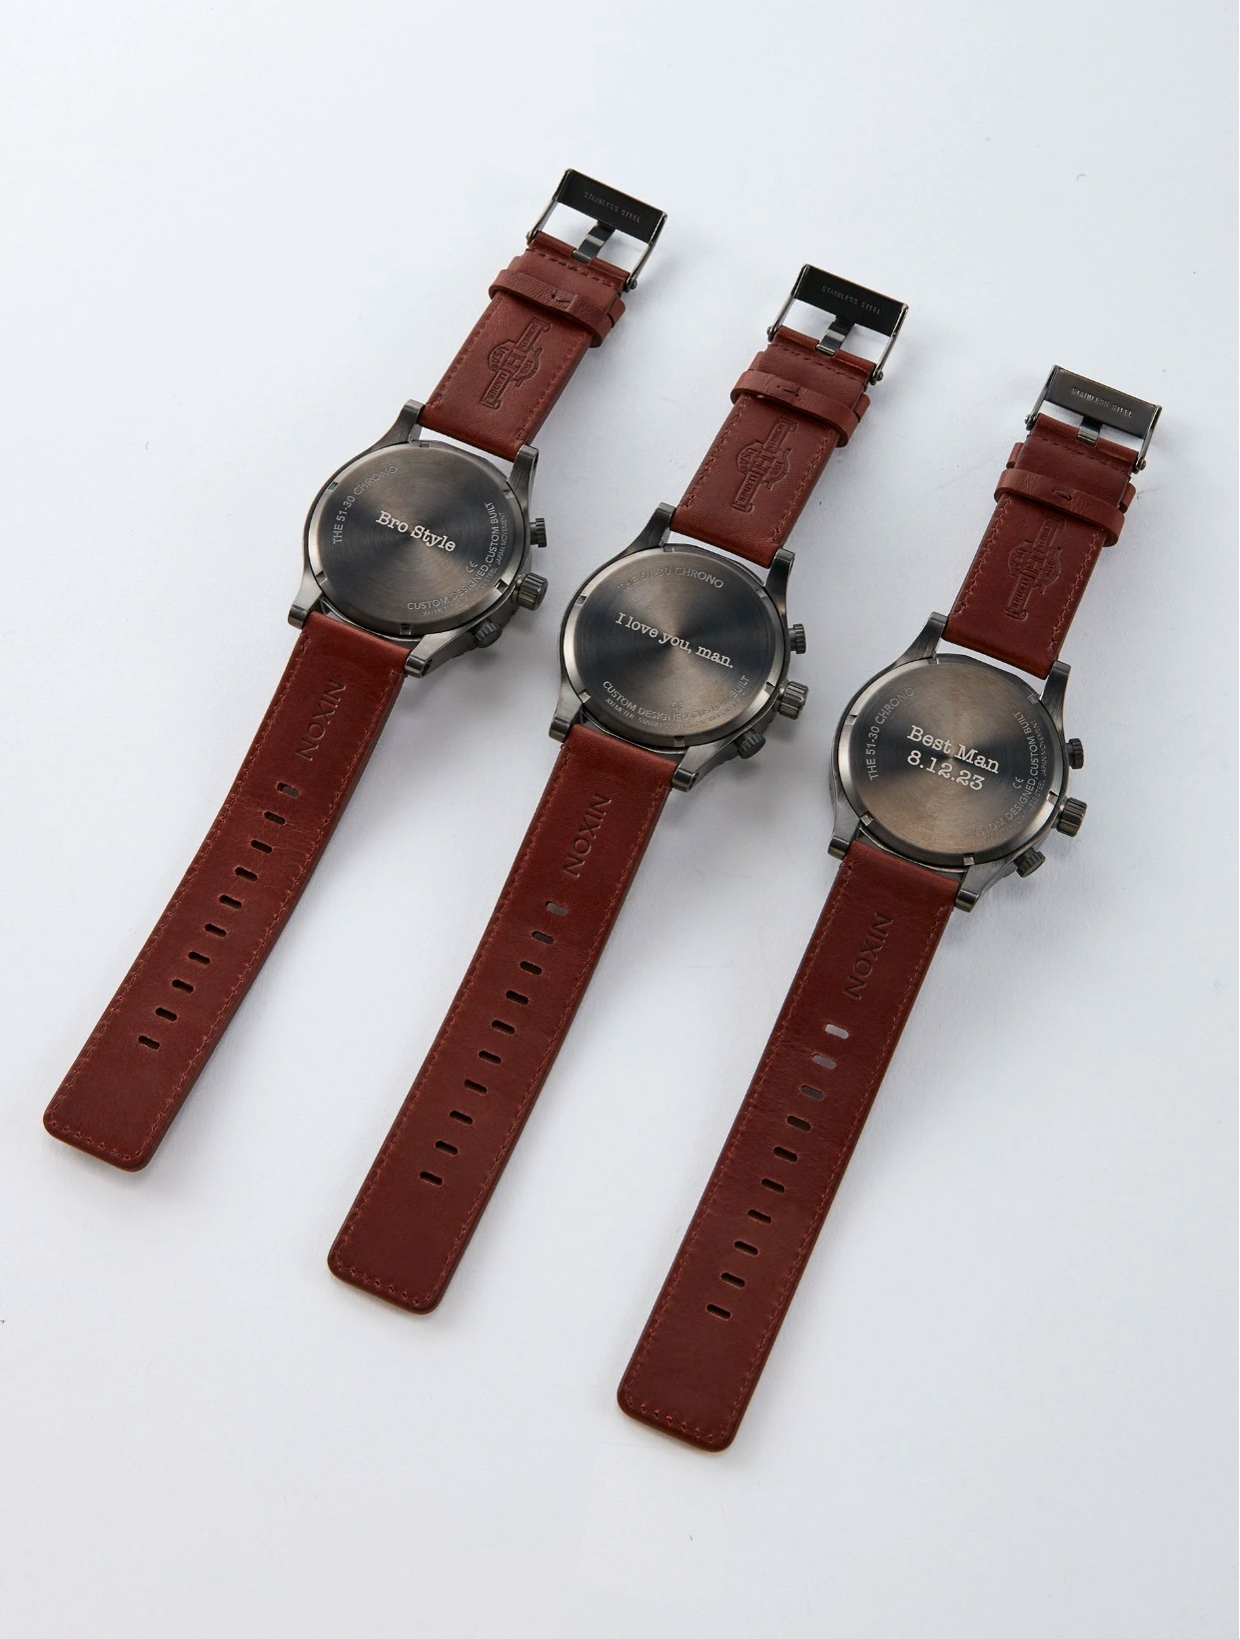 Wedding Gift Ideas from Nixon Watches